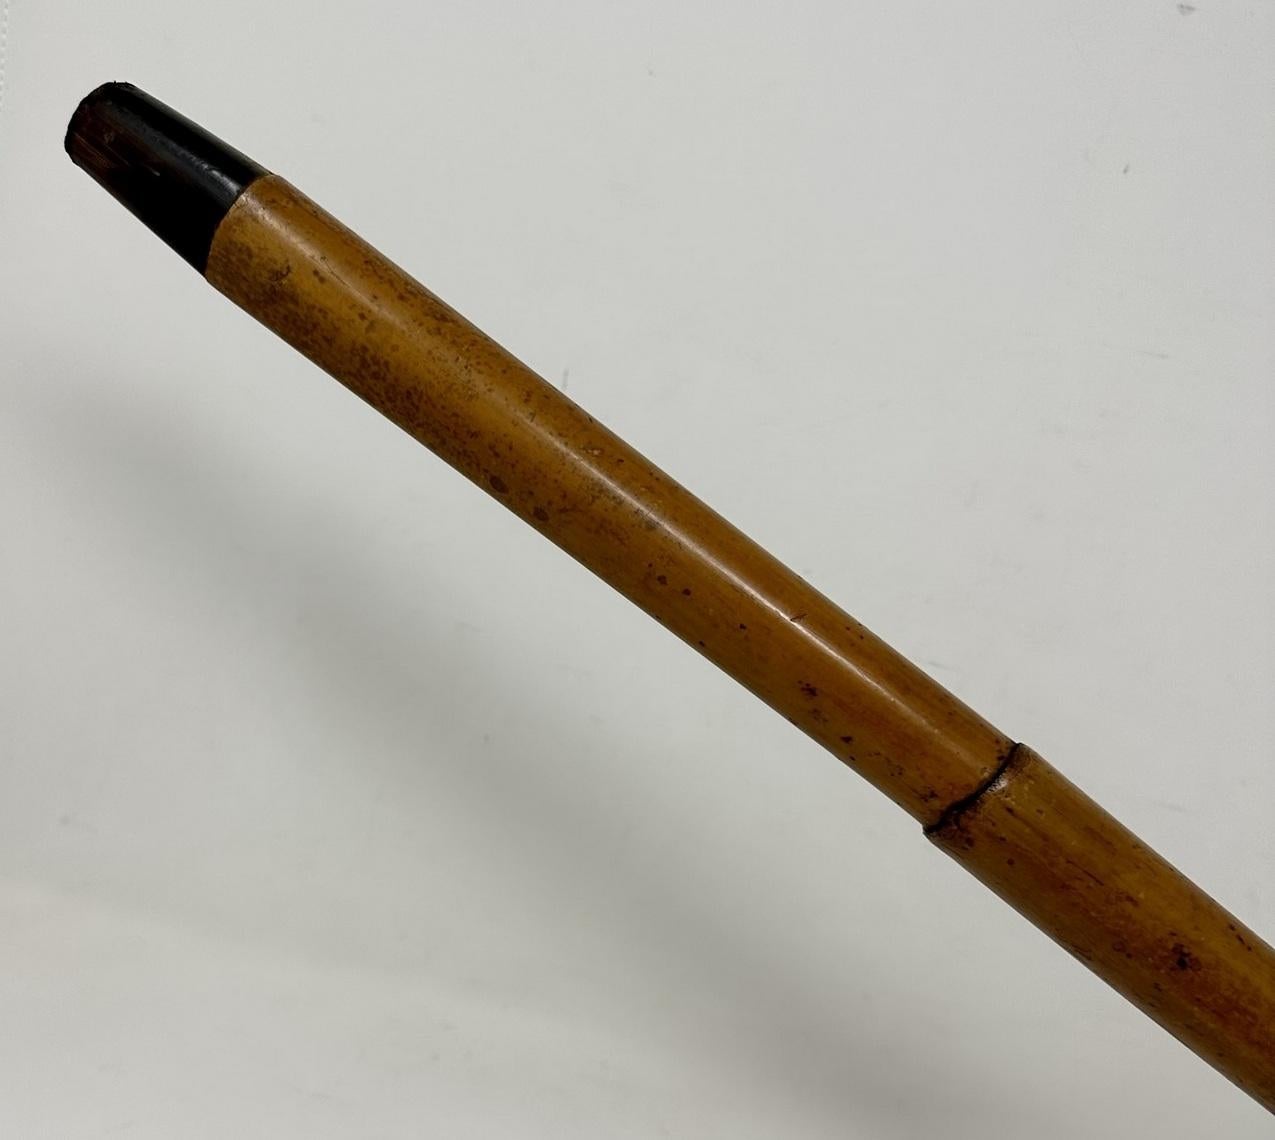 Antique Vintage Lady's Gentleman's Wooden Malacca Walking Swagger Stick Cane 19C In Good Condition For Sale In Dublin, Ireland